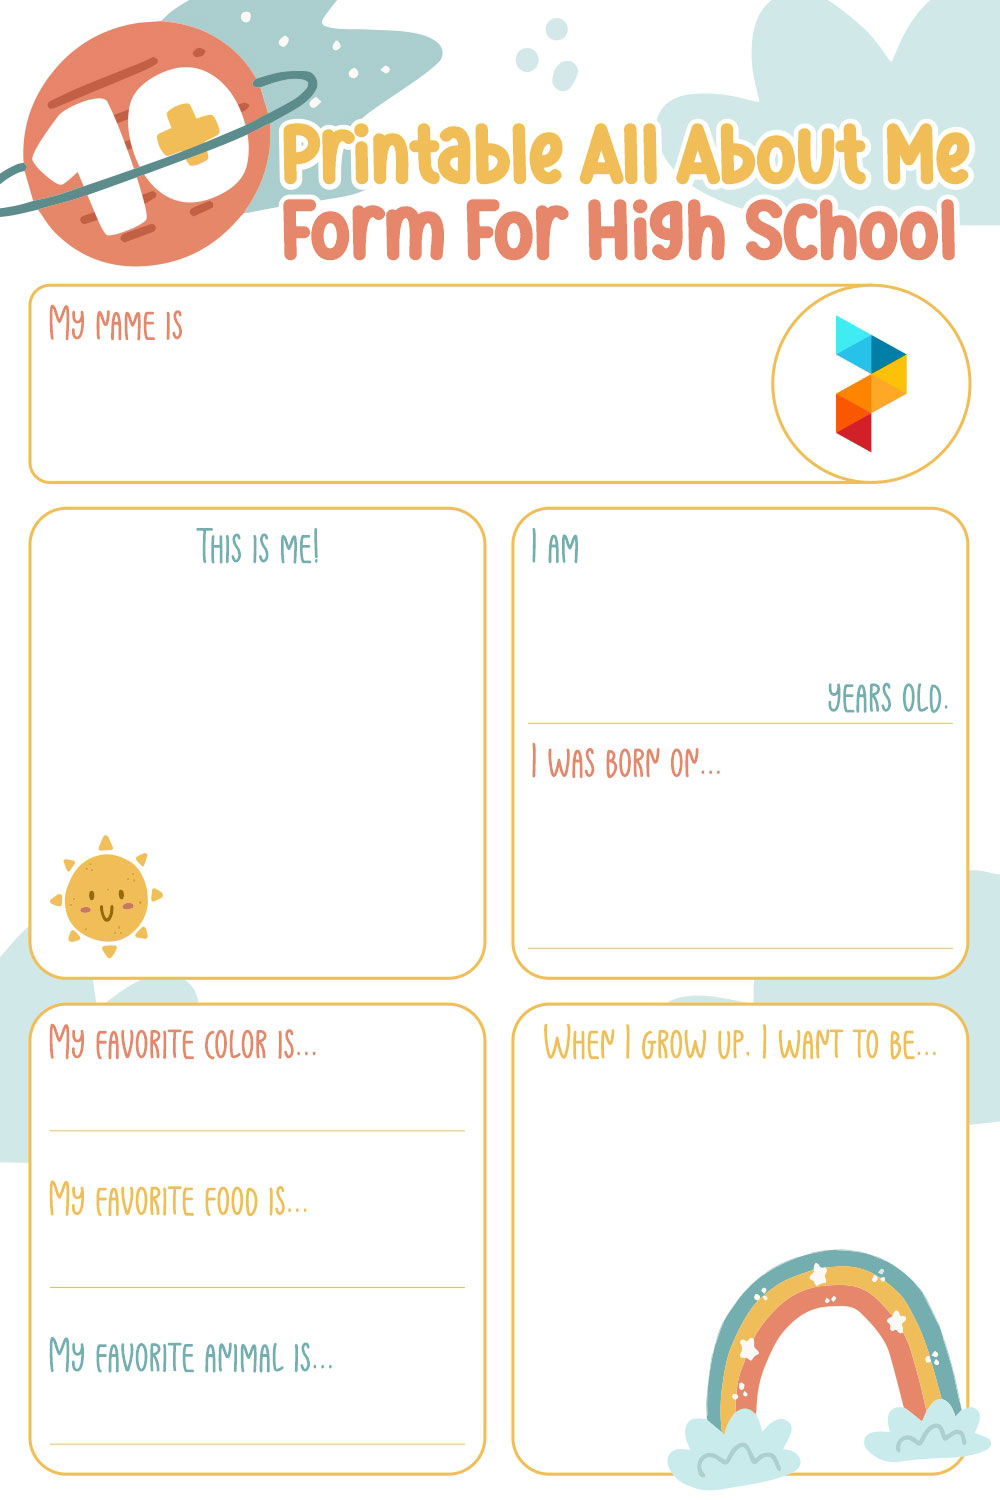 Printable All About Me Form For High School